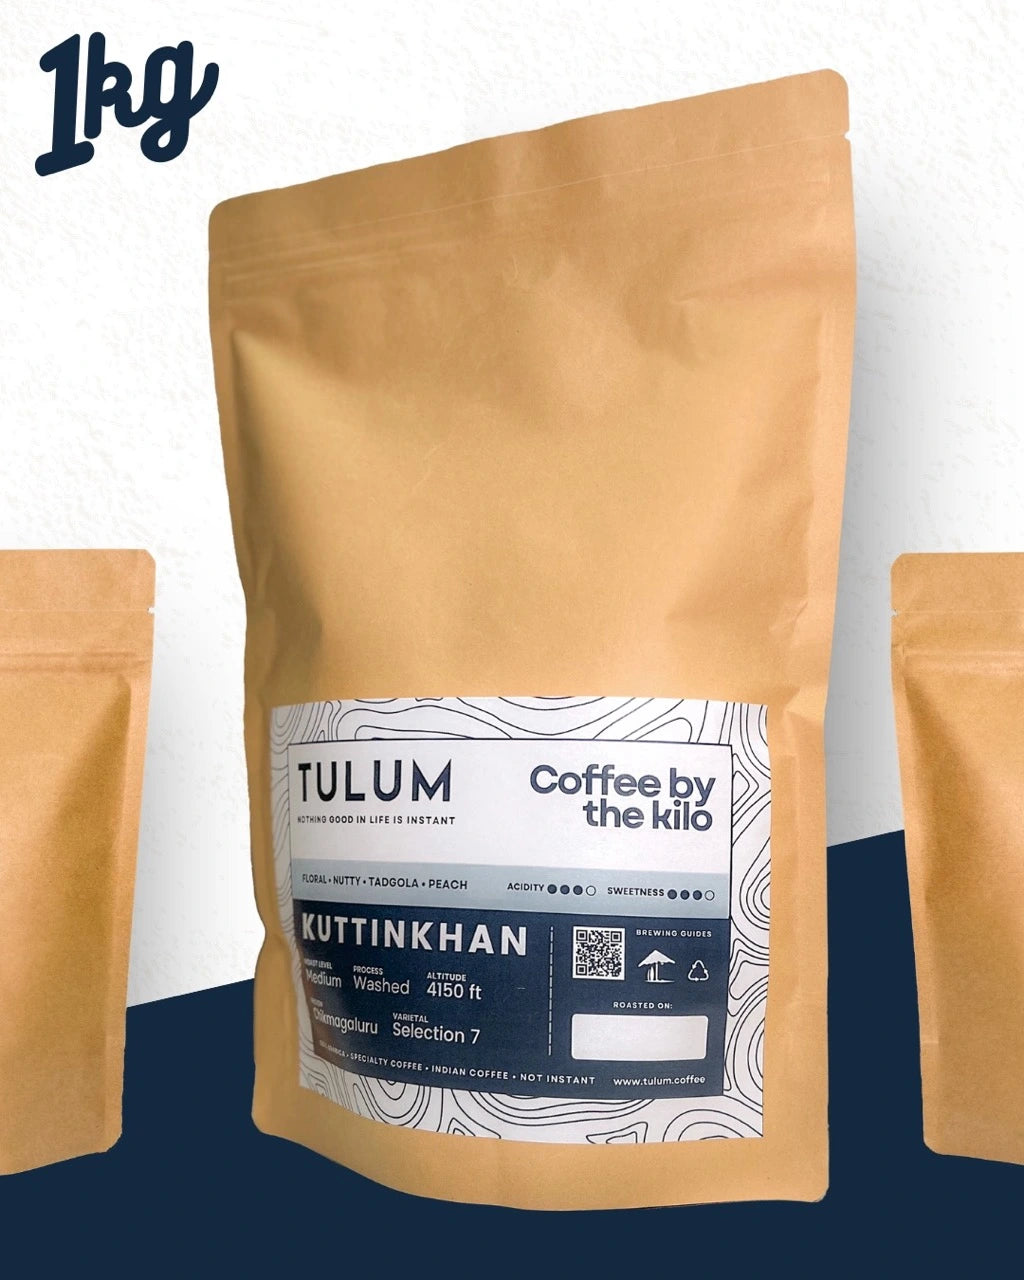 Coffee by the Kilo by Tulum Coffee - Kuttinkhan Arabica Coffee Beans in Brown Resealable Packets with Fruity and Floral notes